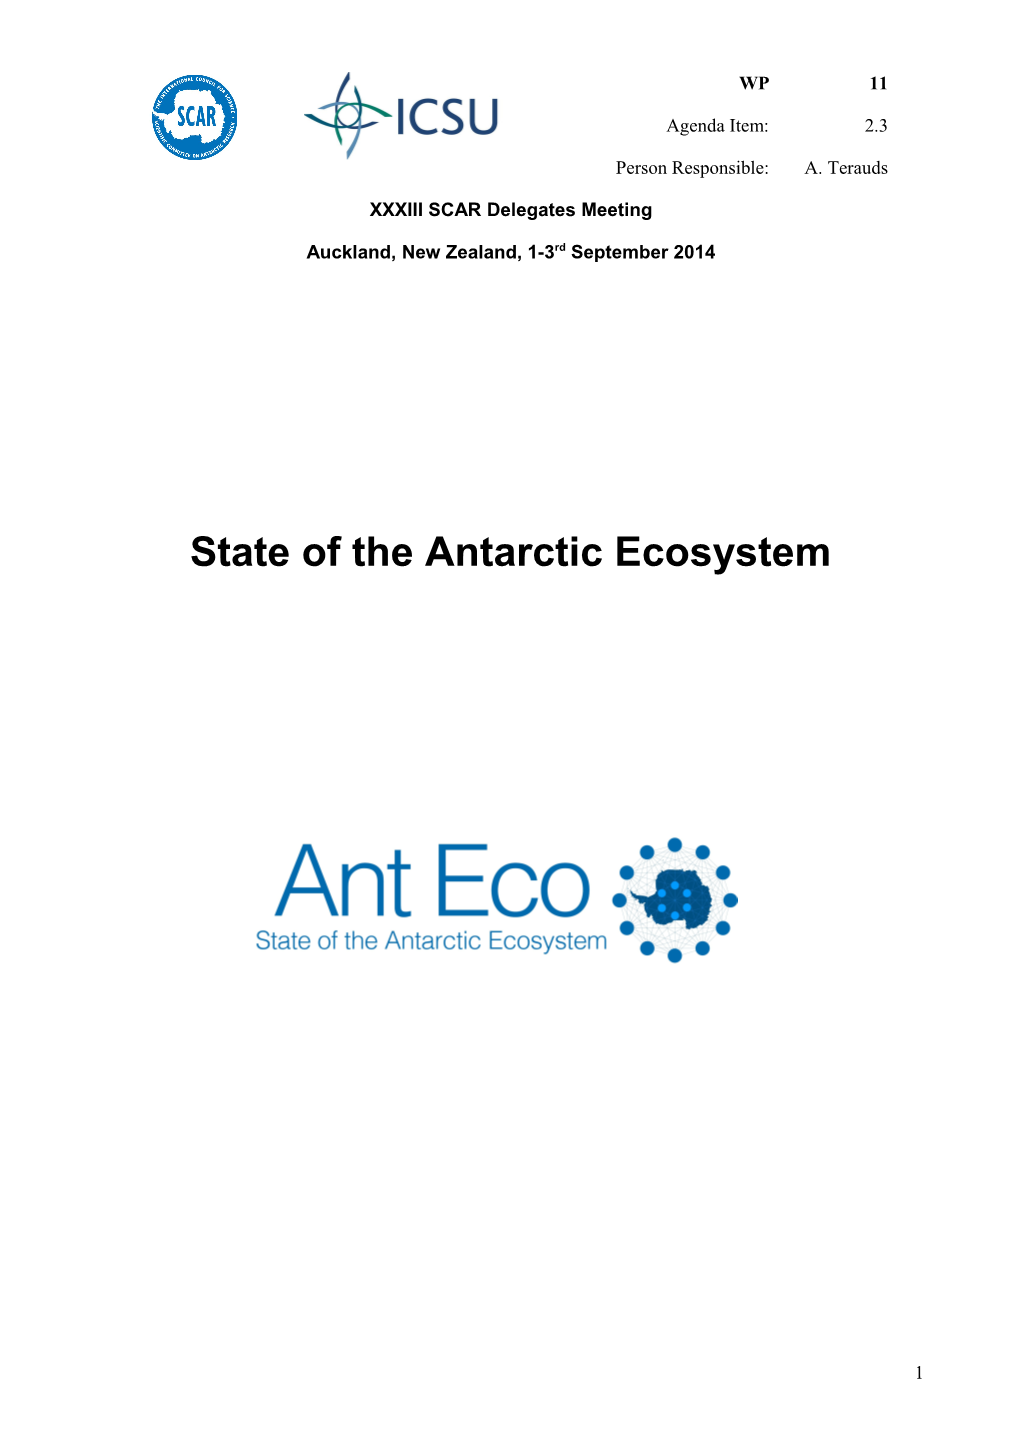 State of the Antarctic Ecosystem